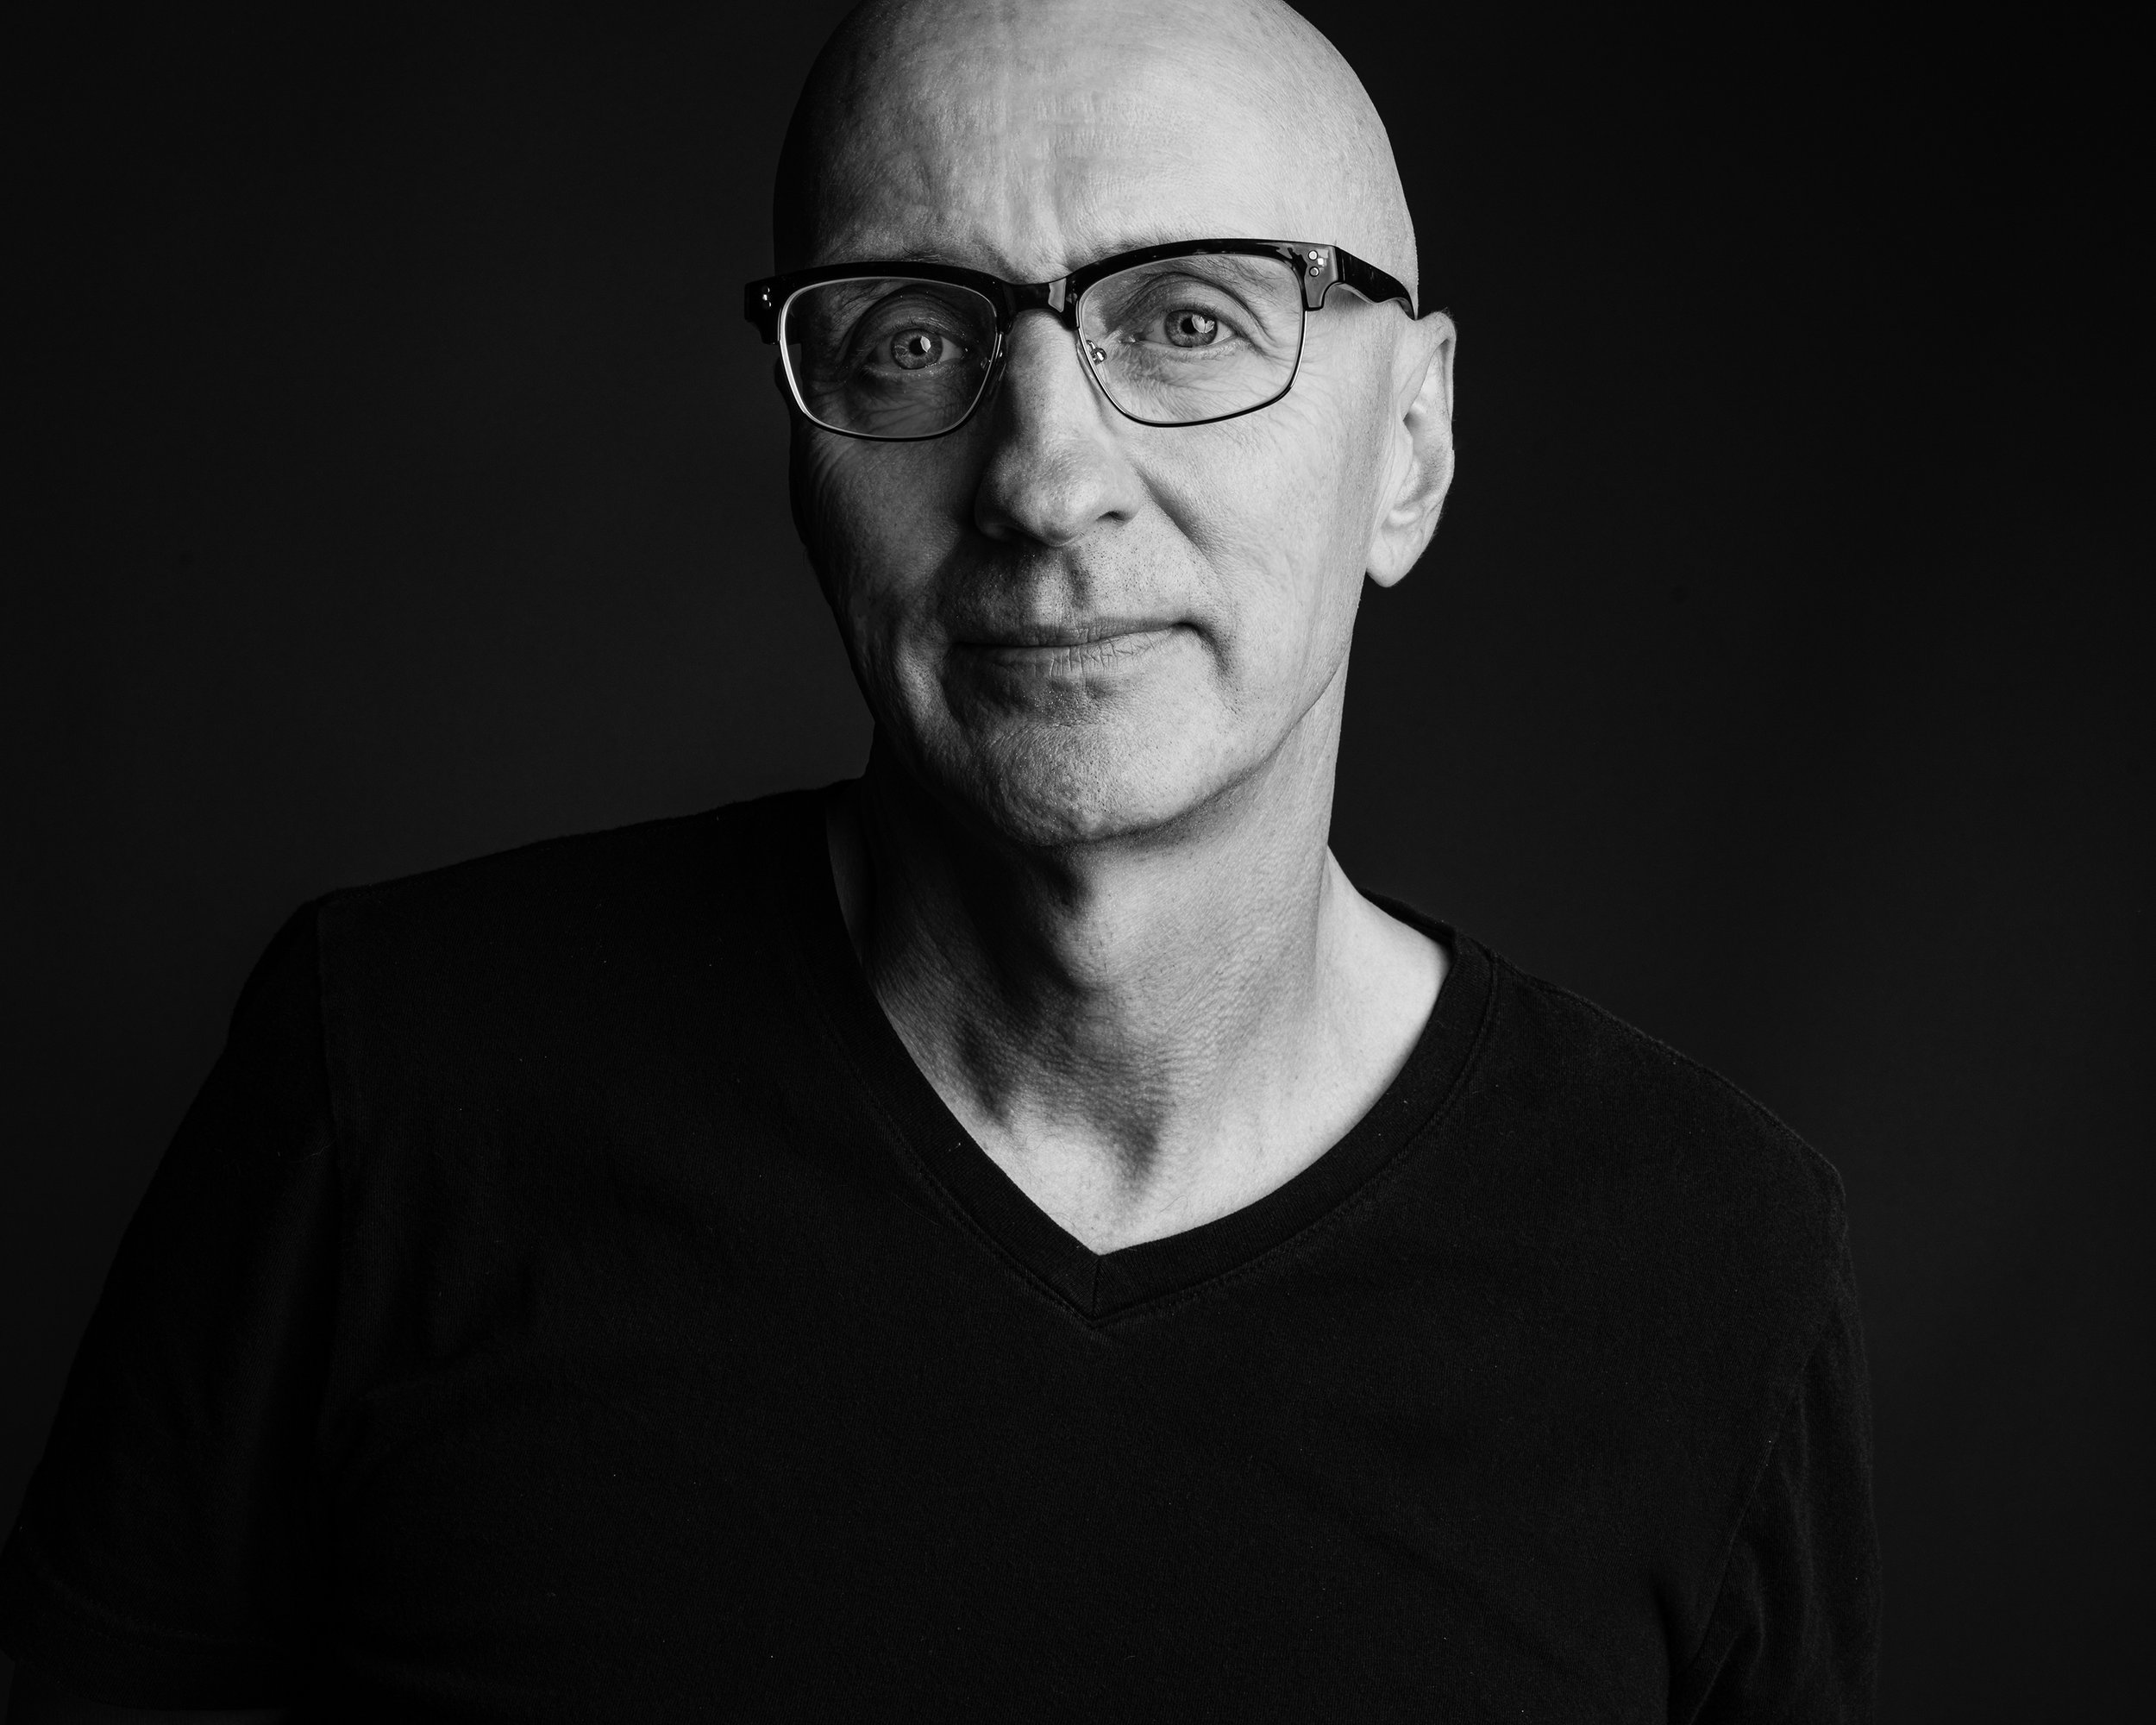 A black-and-white portrait photograph of photographer Randy Bacon